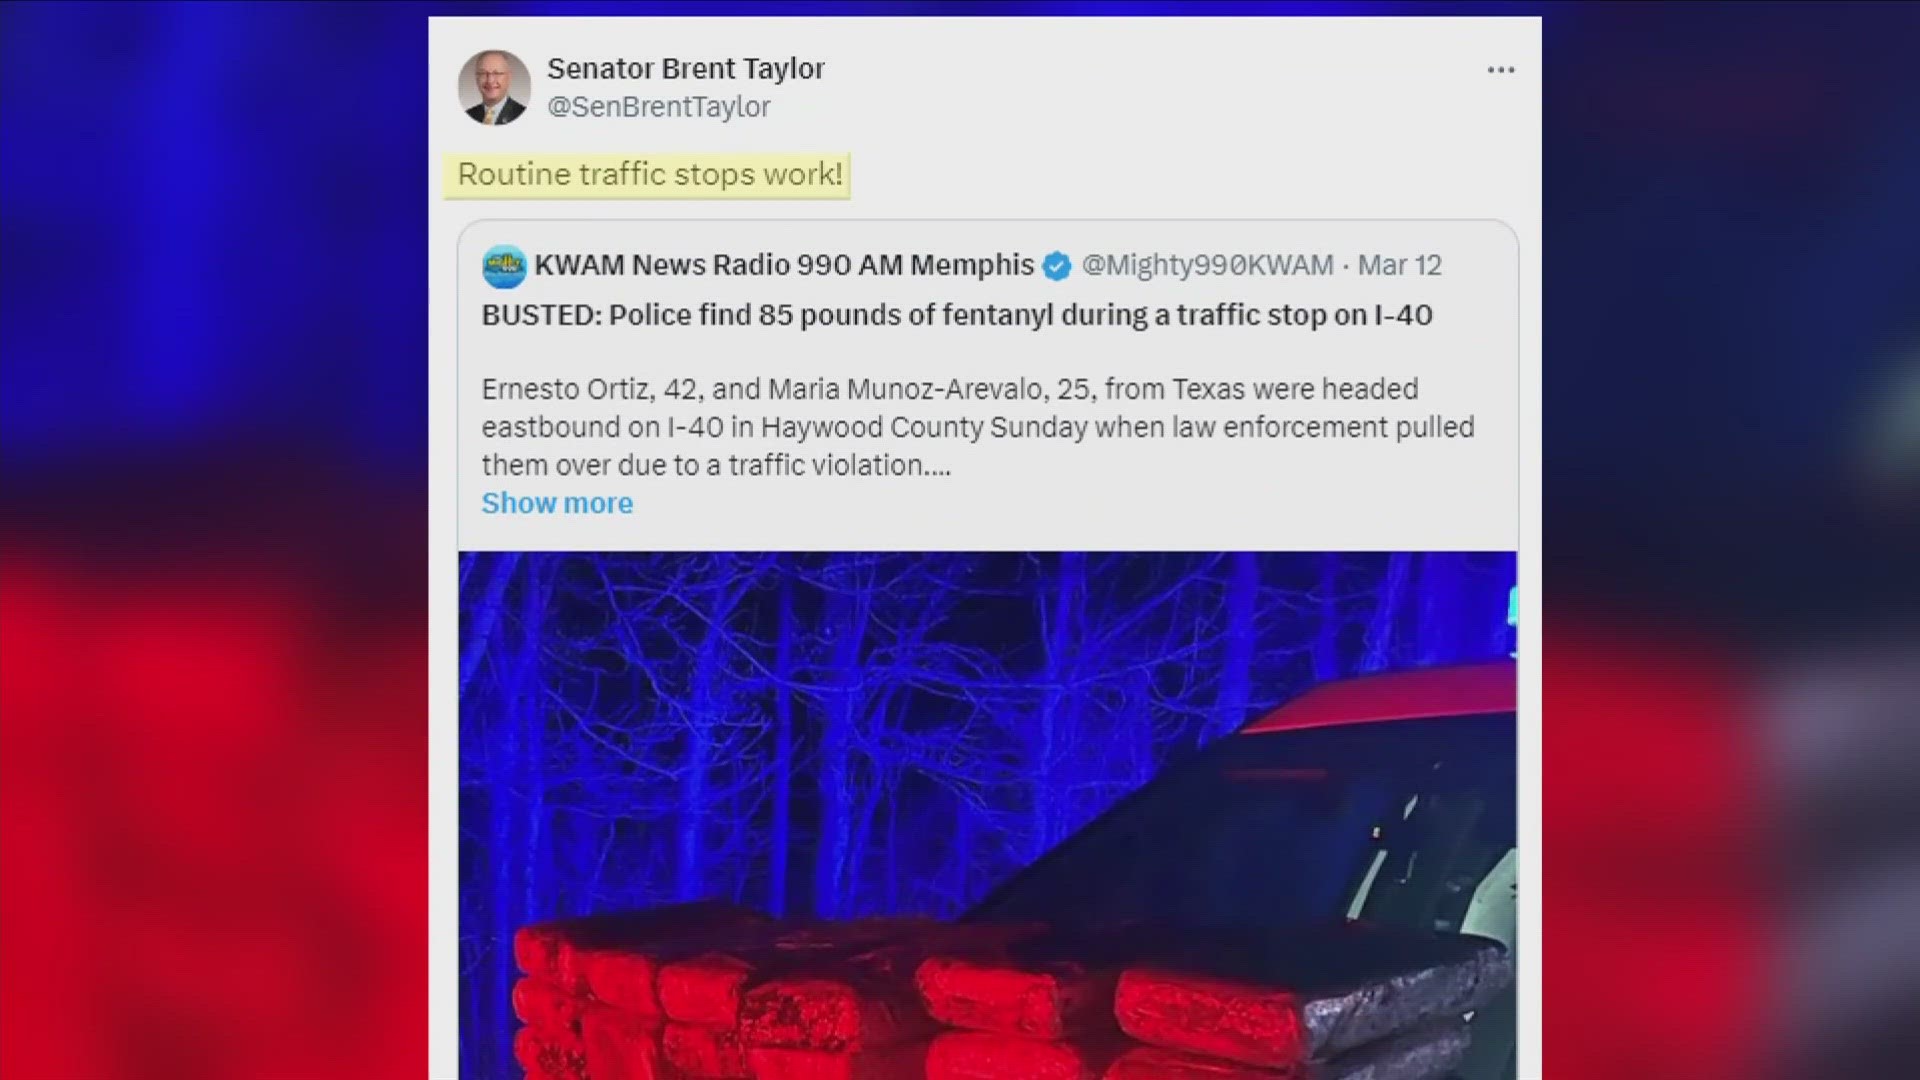 Following Tyre Nichols' death, Memphis banned minor traffic stops, but now Governor Bill Lee could undo that. Do these traffic stops reduce crime?